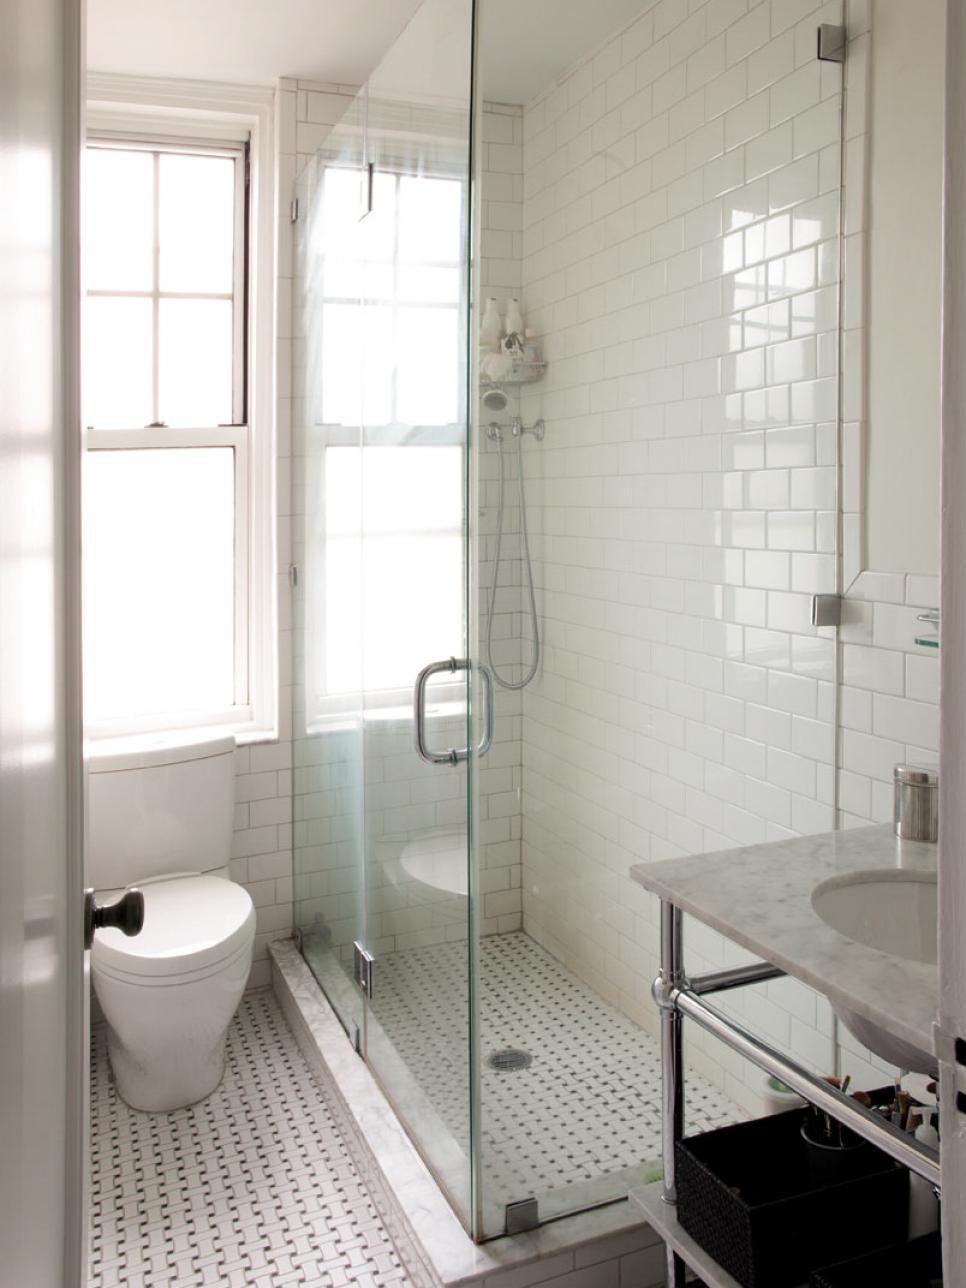 Subway and Basket Weave Tile in White Bathroom with Glass Shower